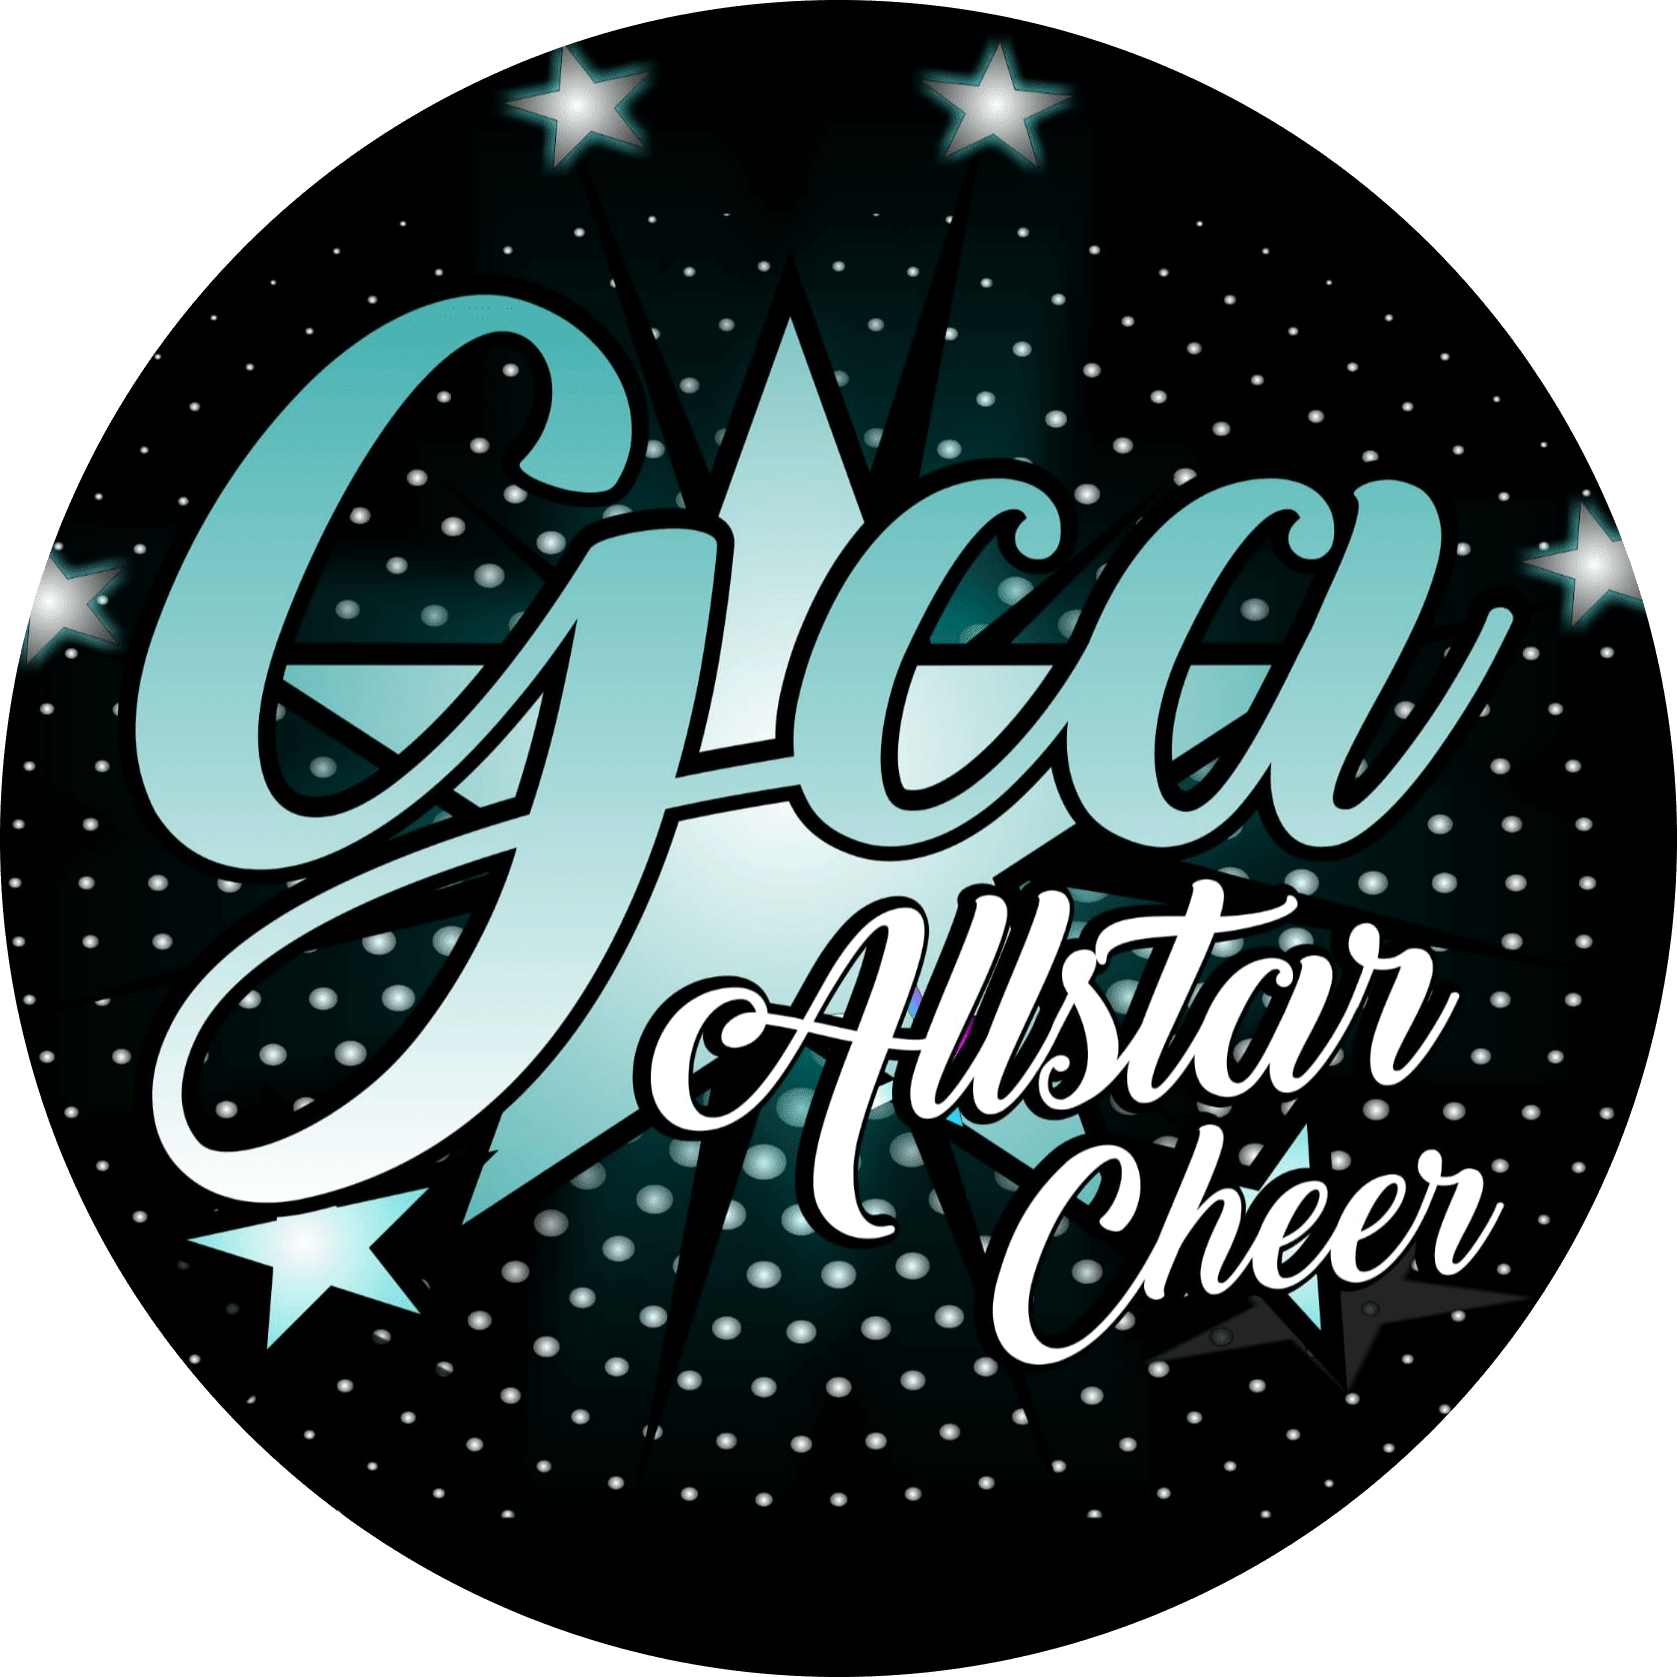 Gloucestershire Cheer and Dance Academy